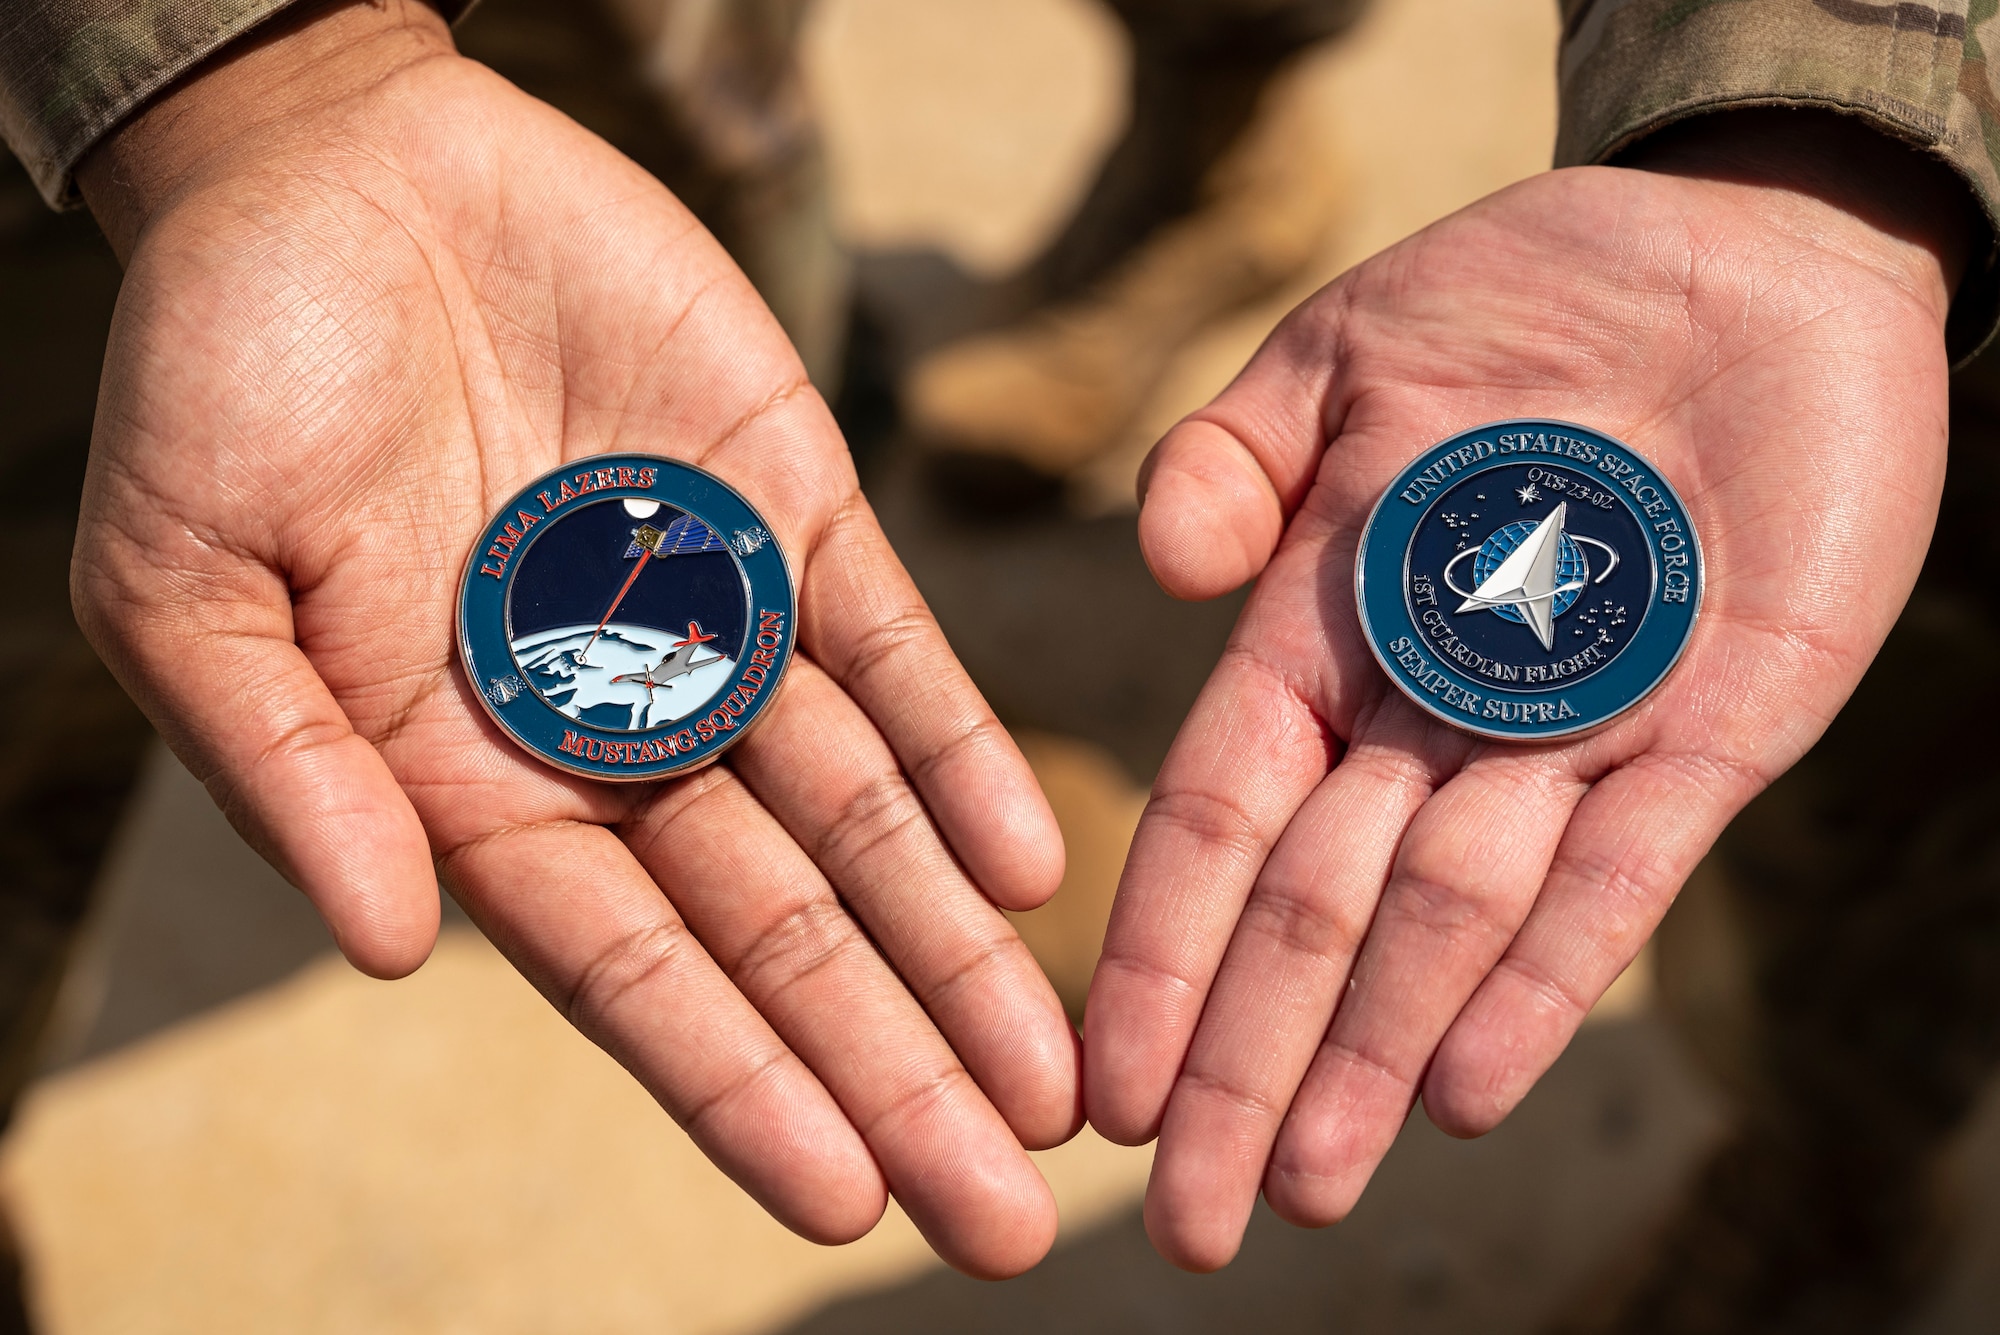 A newly minted challenge coin commemorates Officer Training School’s Lima Flight as the first all-Space Force Guardian flight to commission at OTS, as depicted on the coin on right. The coin on the left pays tribute to the Tuskegee Airmen, the namesake of the OTS Mustangs student squadron, in which the flight is assigned.